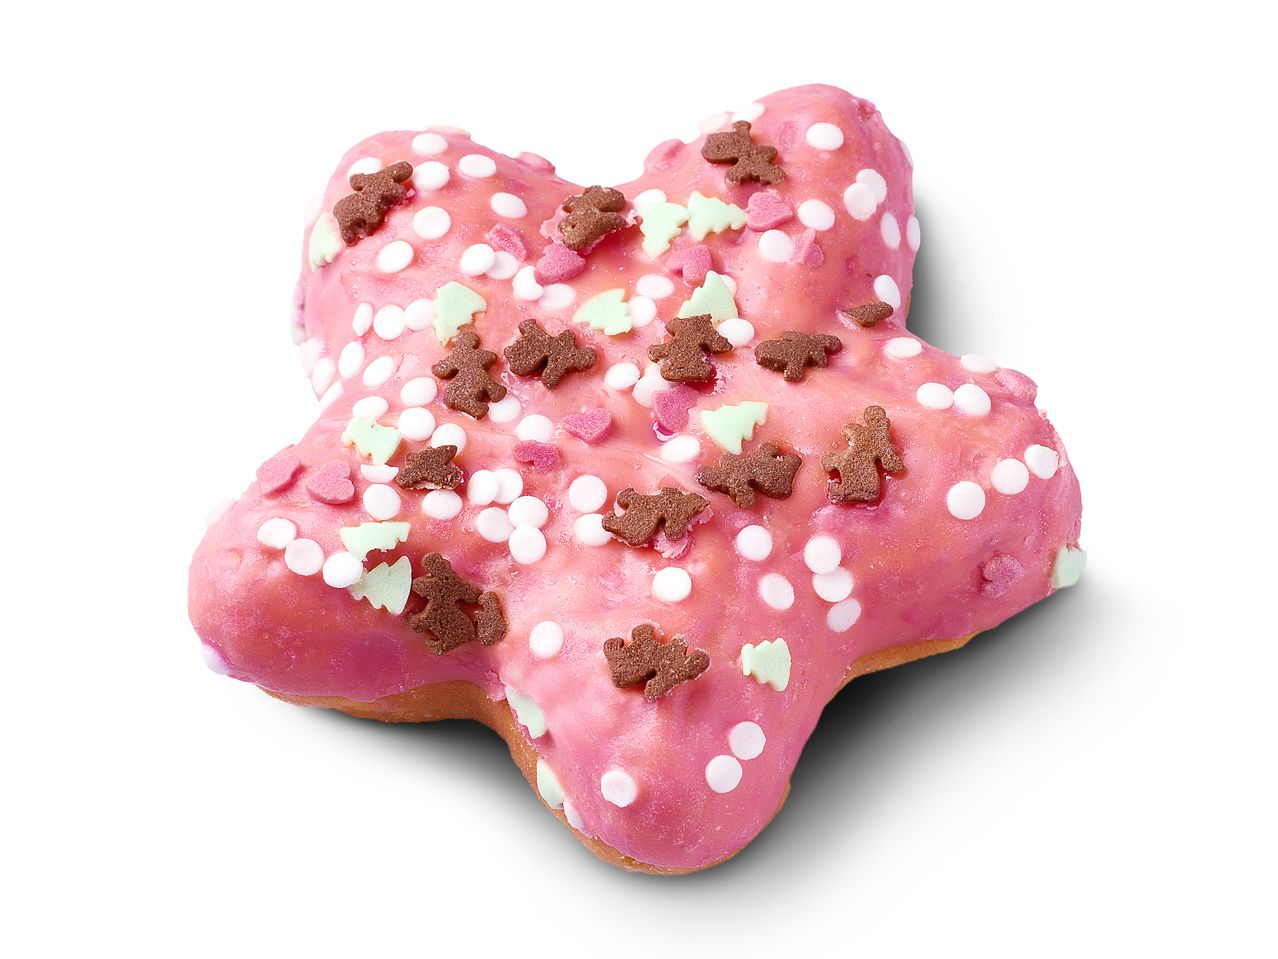 Go to full screen view: Star Filled Doughnut - Image 1